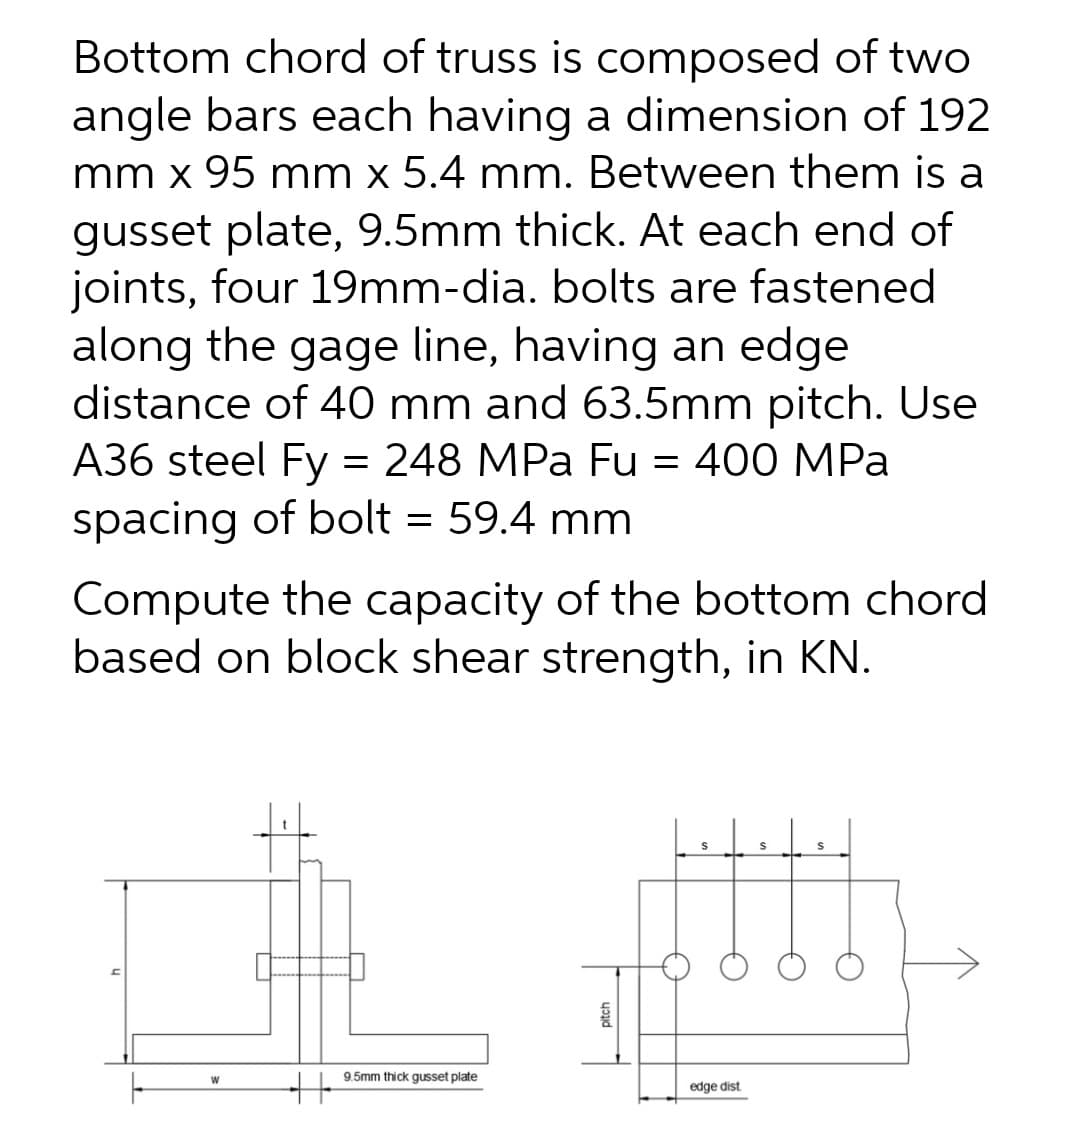 Bottom chord of truss is composed of two
angle bars each having a dimension of 192
mm x 95 mm x 5.4 mm. Between them is a
gusset plate, 9.5mm thick. At each end of
joints, four 19mm-dia. bolts are fastened
along the gage line, having an edge
distance of 40 mm and 63.5mm pitch. Use
A36 steel Fy = 248 MPa Fu = 400 MPa
spacing of bolt = 59.4 mm
Compute the capacity of the bottom chord
based on block shear strength, in KN.
9.5mm thick gusset plate
edge dist
